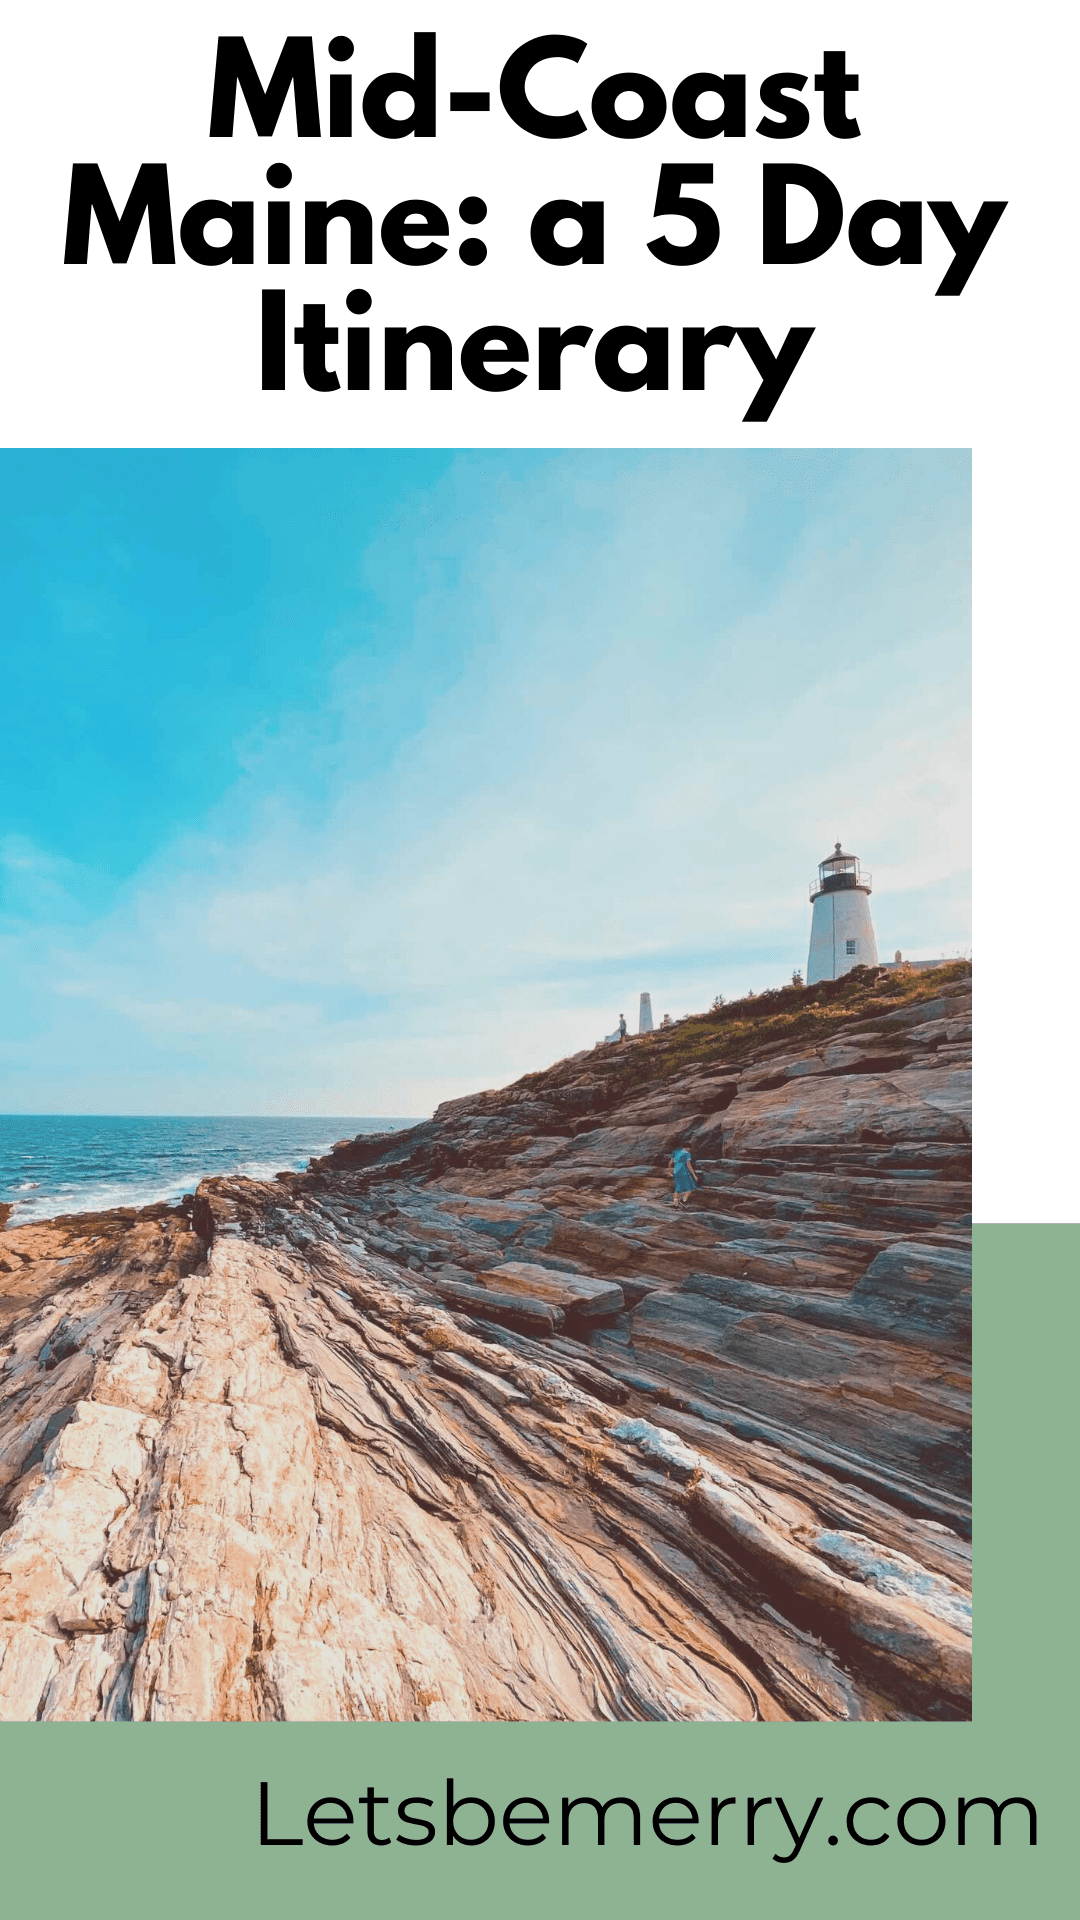 Mid-Coast Maine: A 5 Day Itinerary (Plus Everything to See and Do)